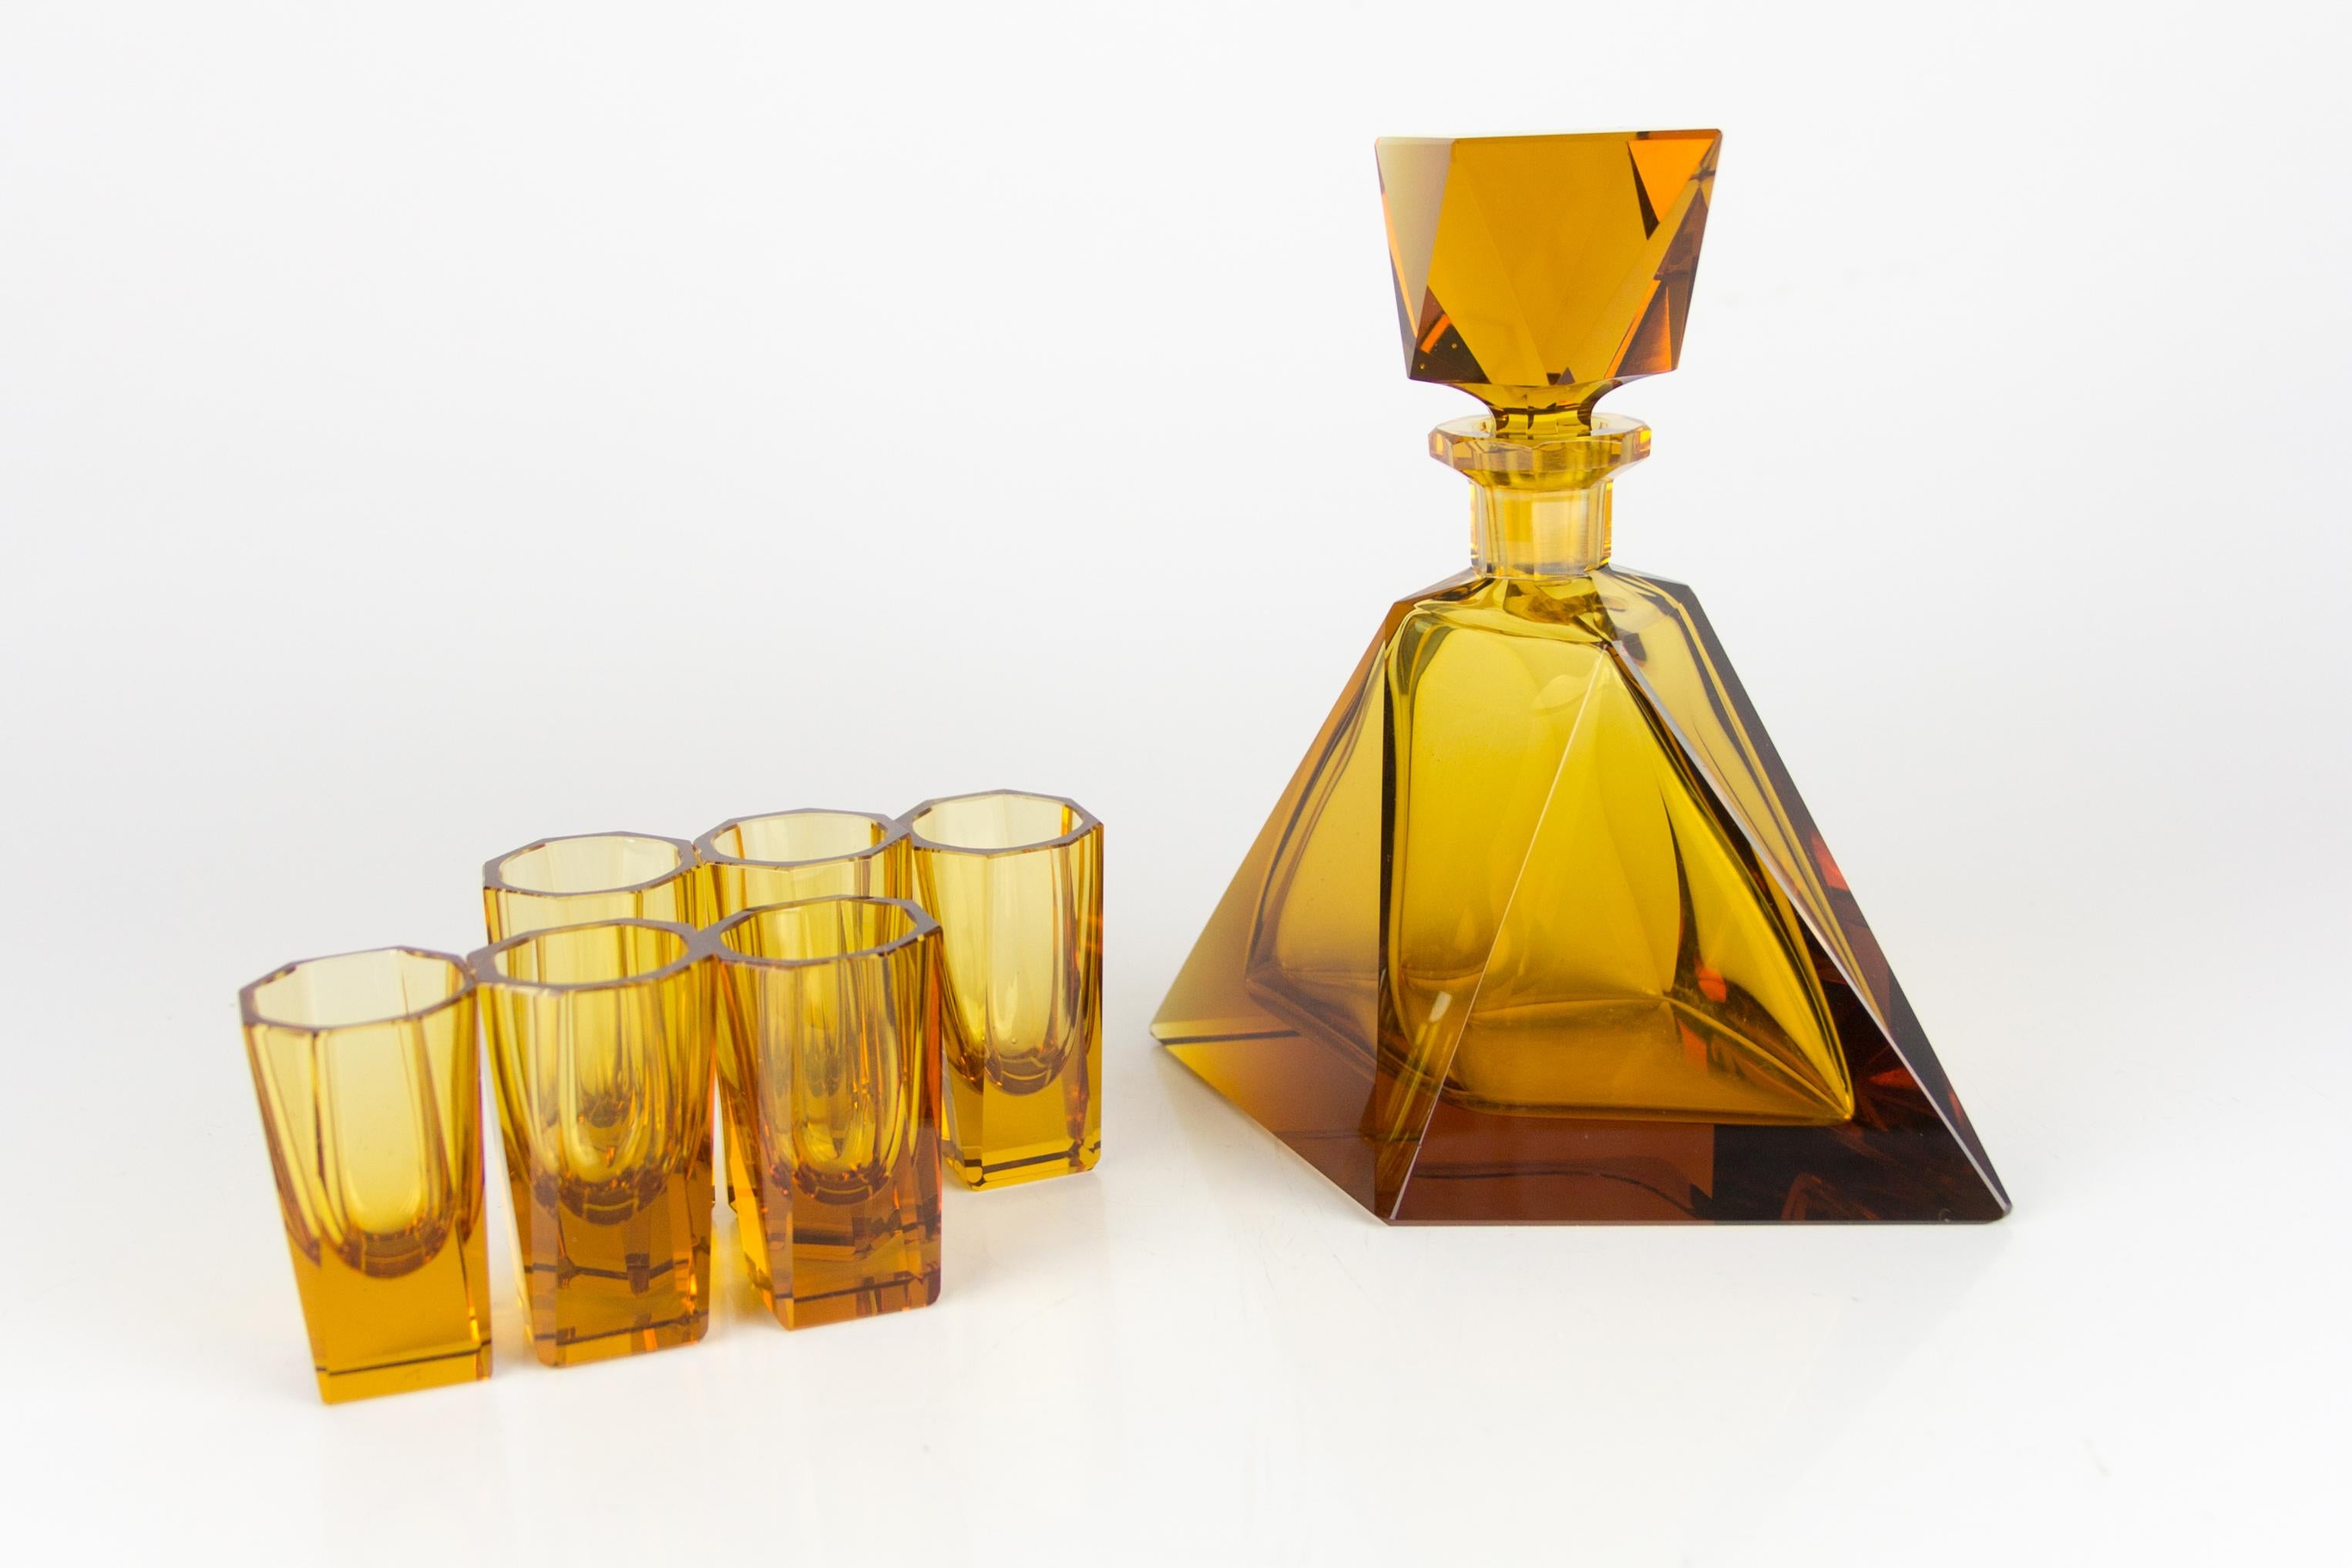 Beautifully colored, handmade Czech Bohemian glass decanter set with 6 glasses, made in the 1930s. The set is in a very nice orange-brown, amber color. As it is handmade, glasses have very small size differences - please see the photos - it can be